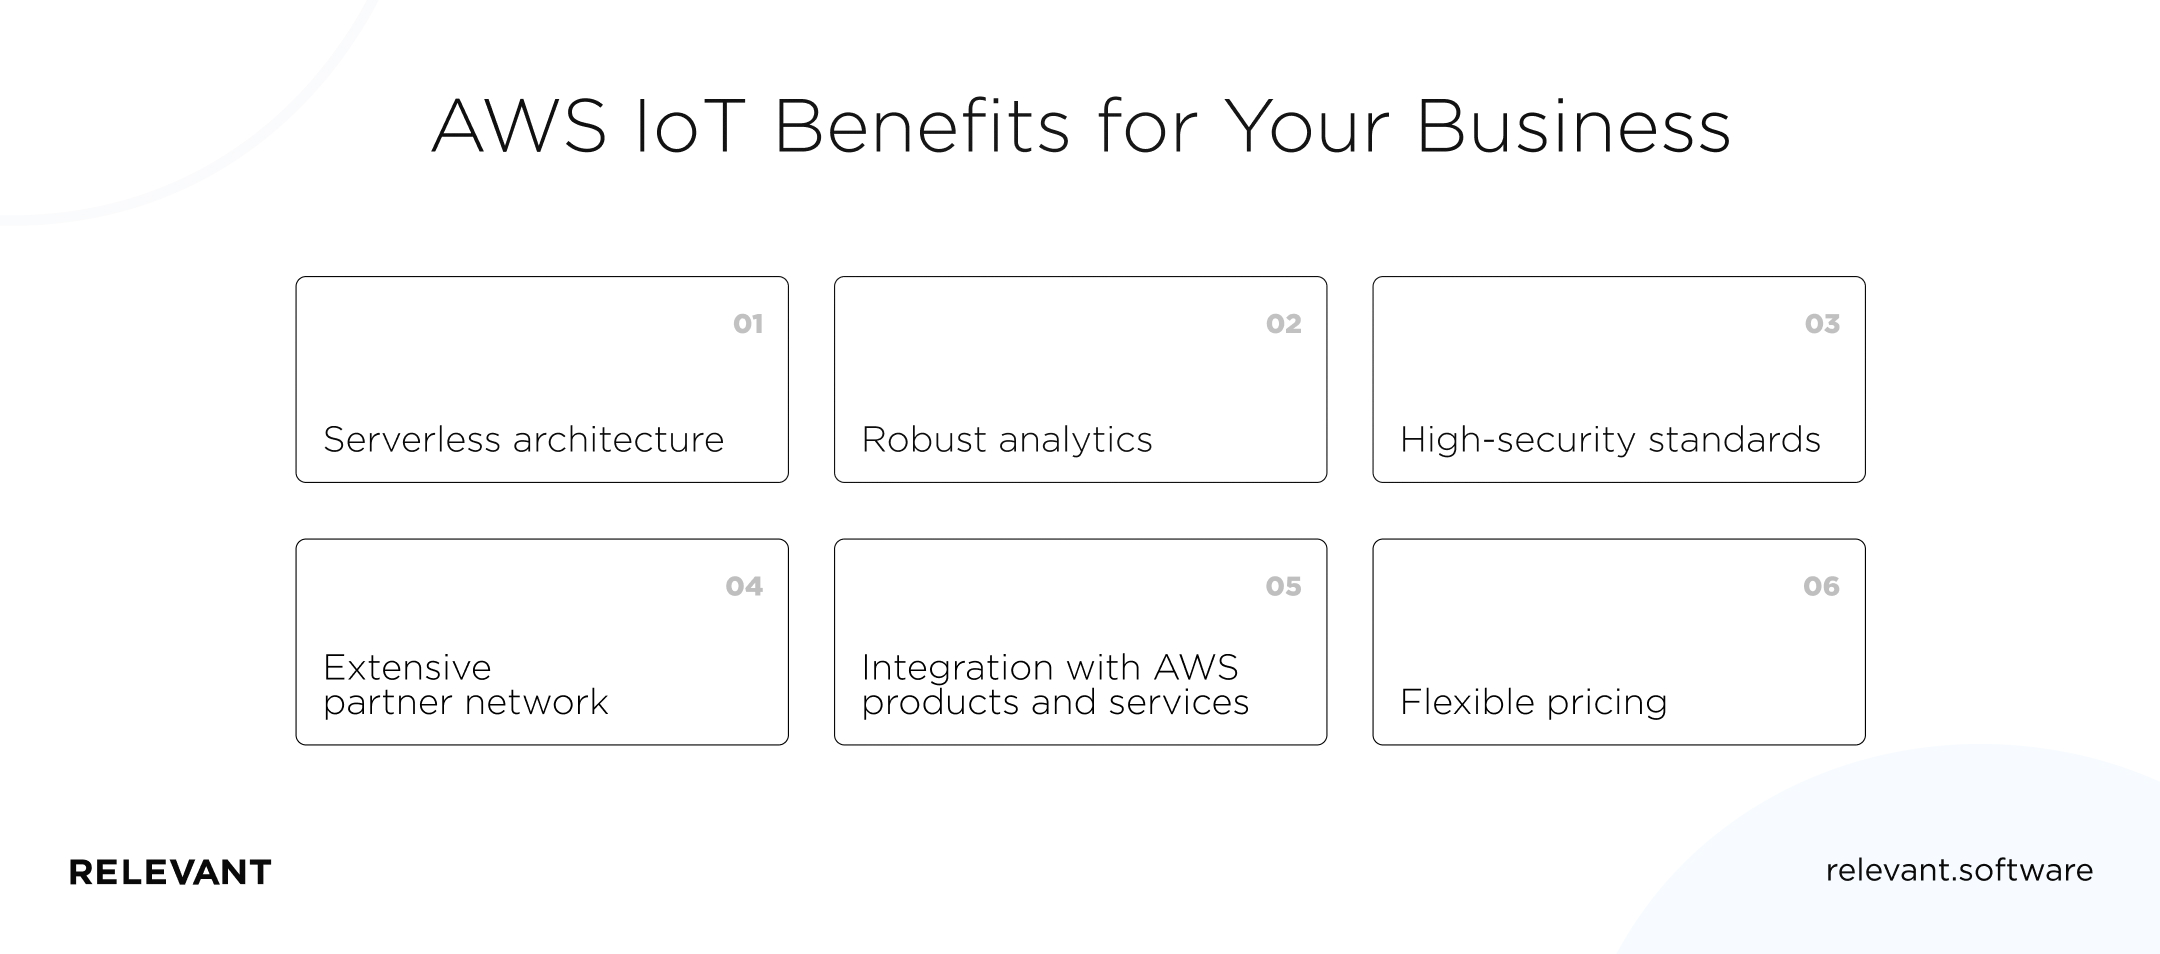 AWS IoT Benefits for Your Business